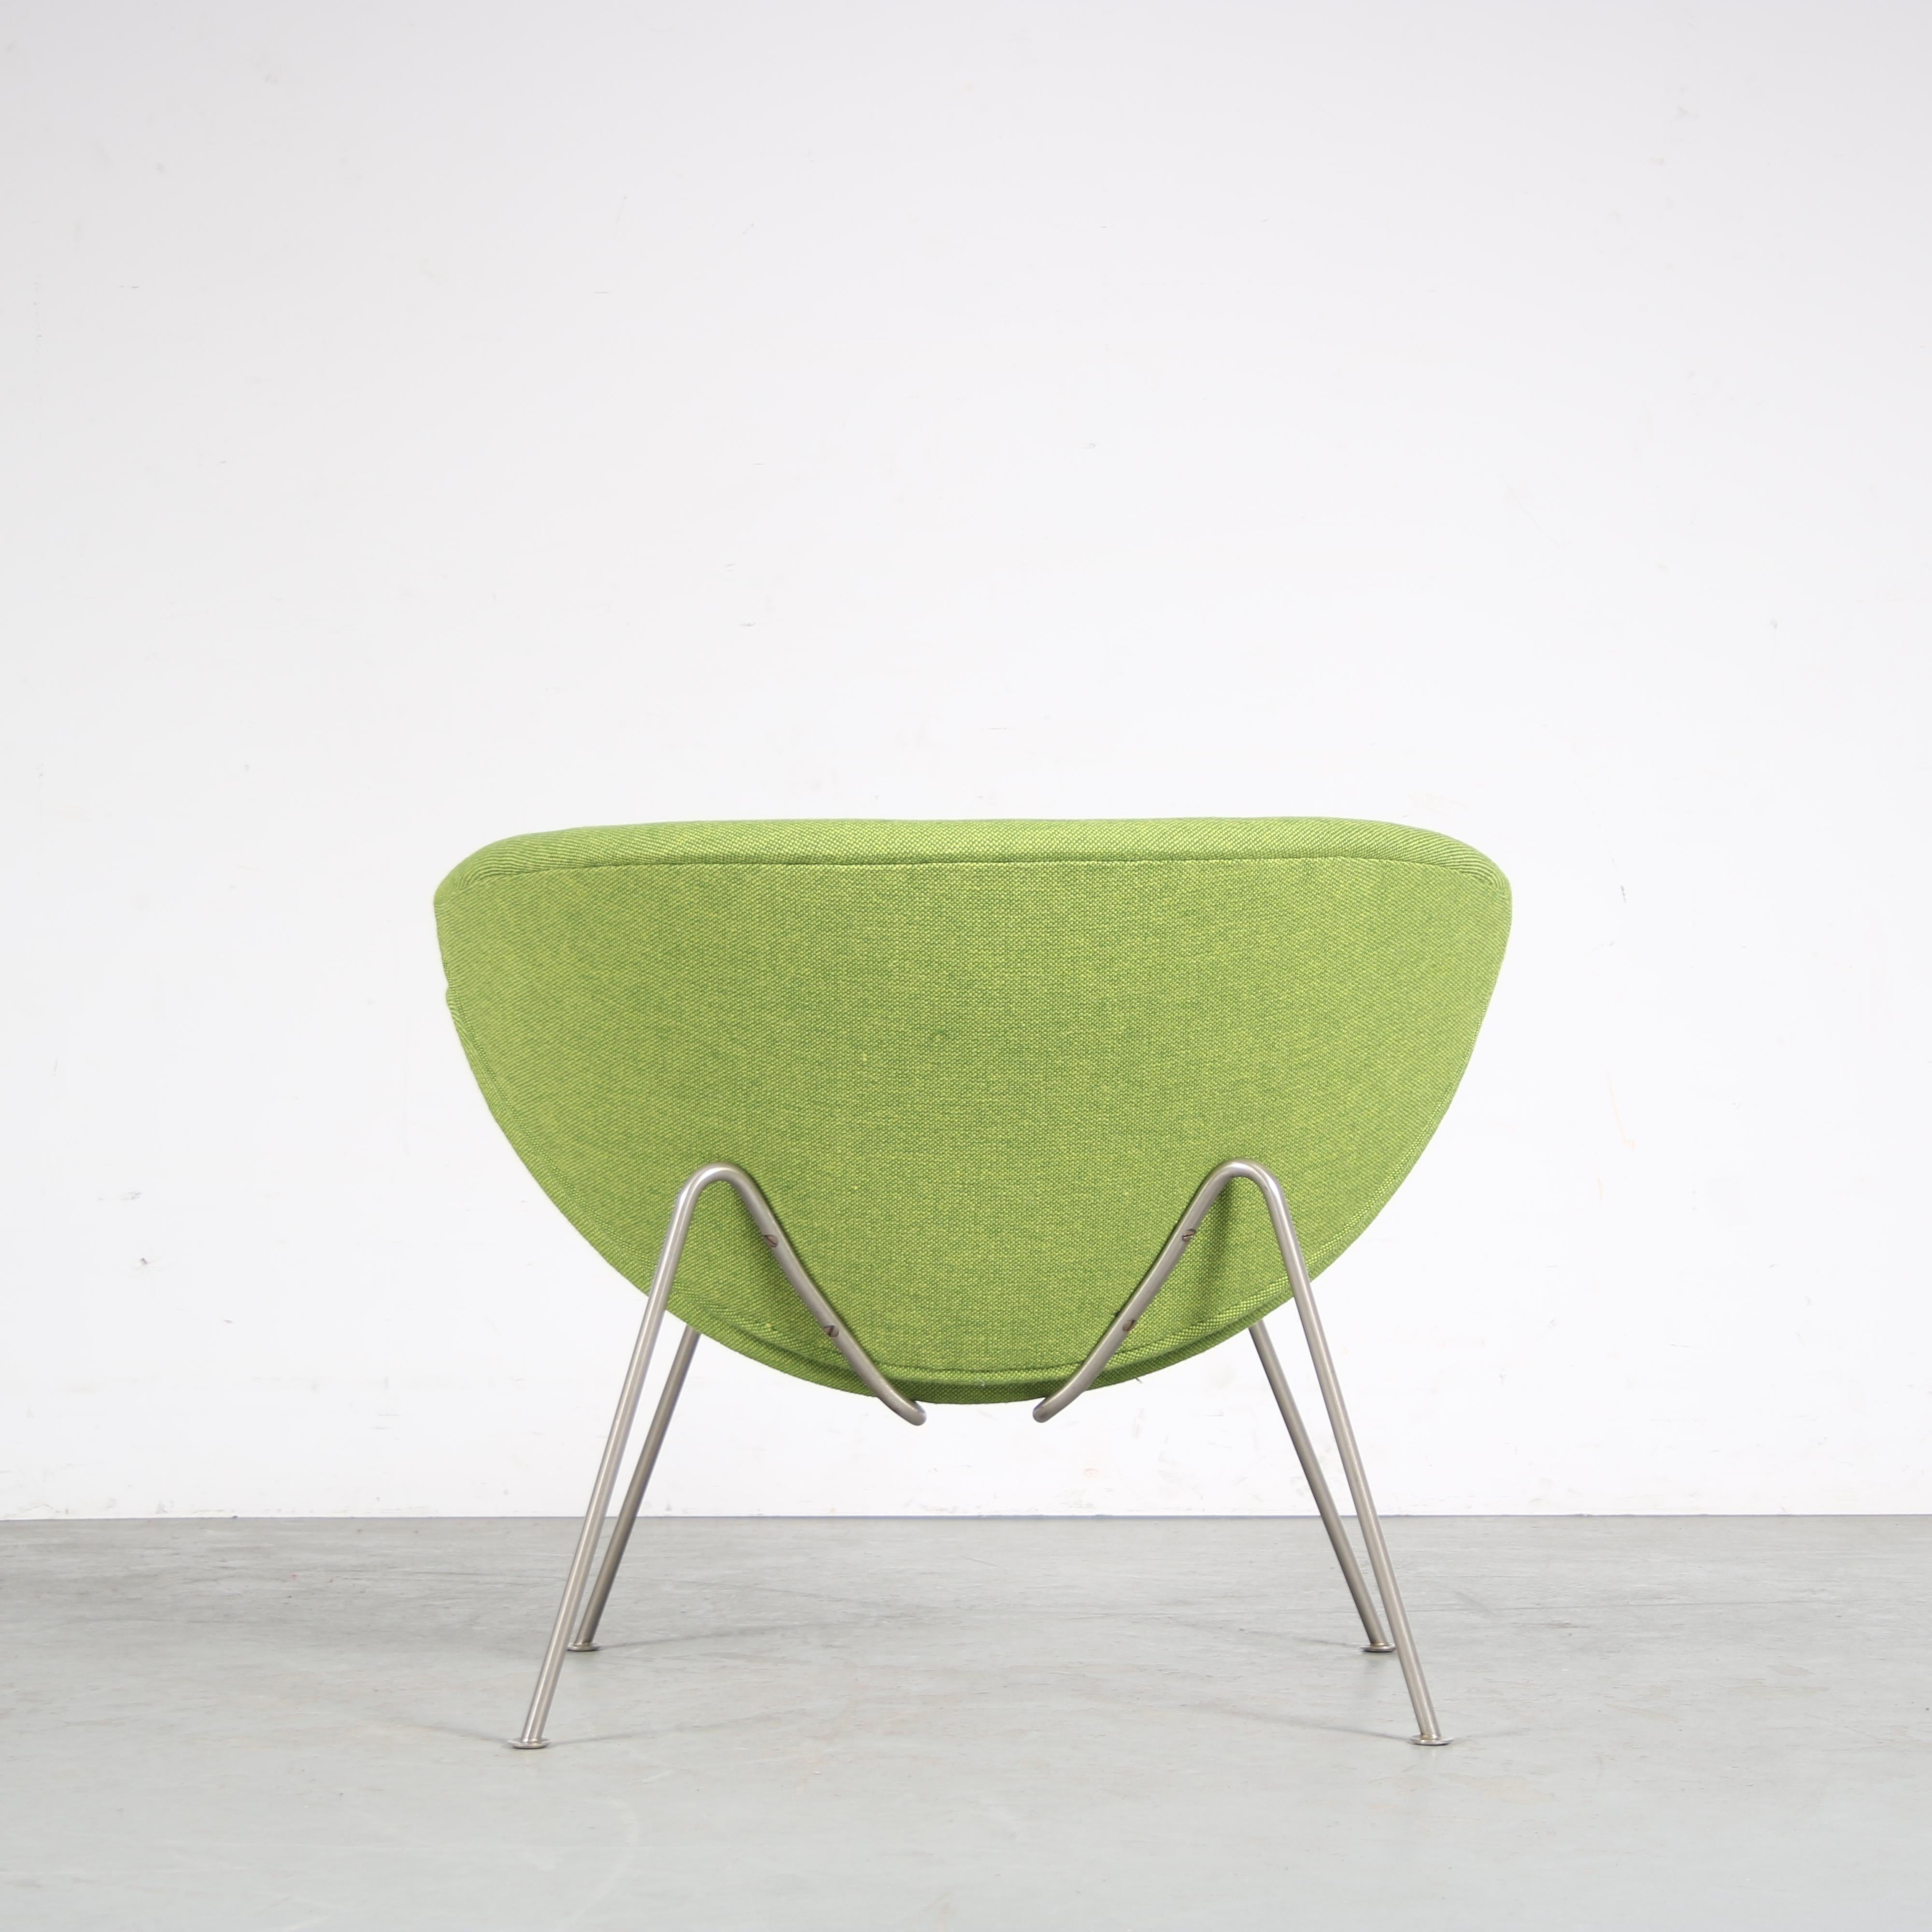 Mid-20th Century “Orange Slice” Chair by Pierre Paulin for Artifort, Netherlands 1960 For Sale